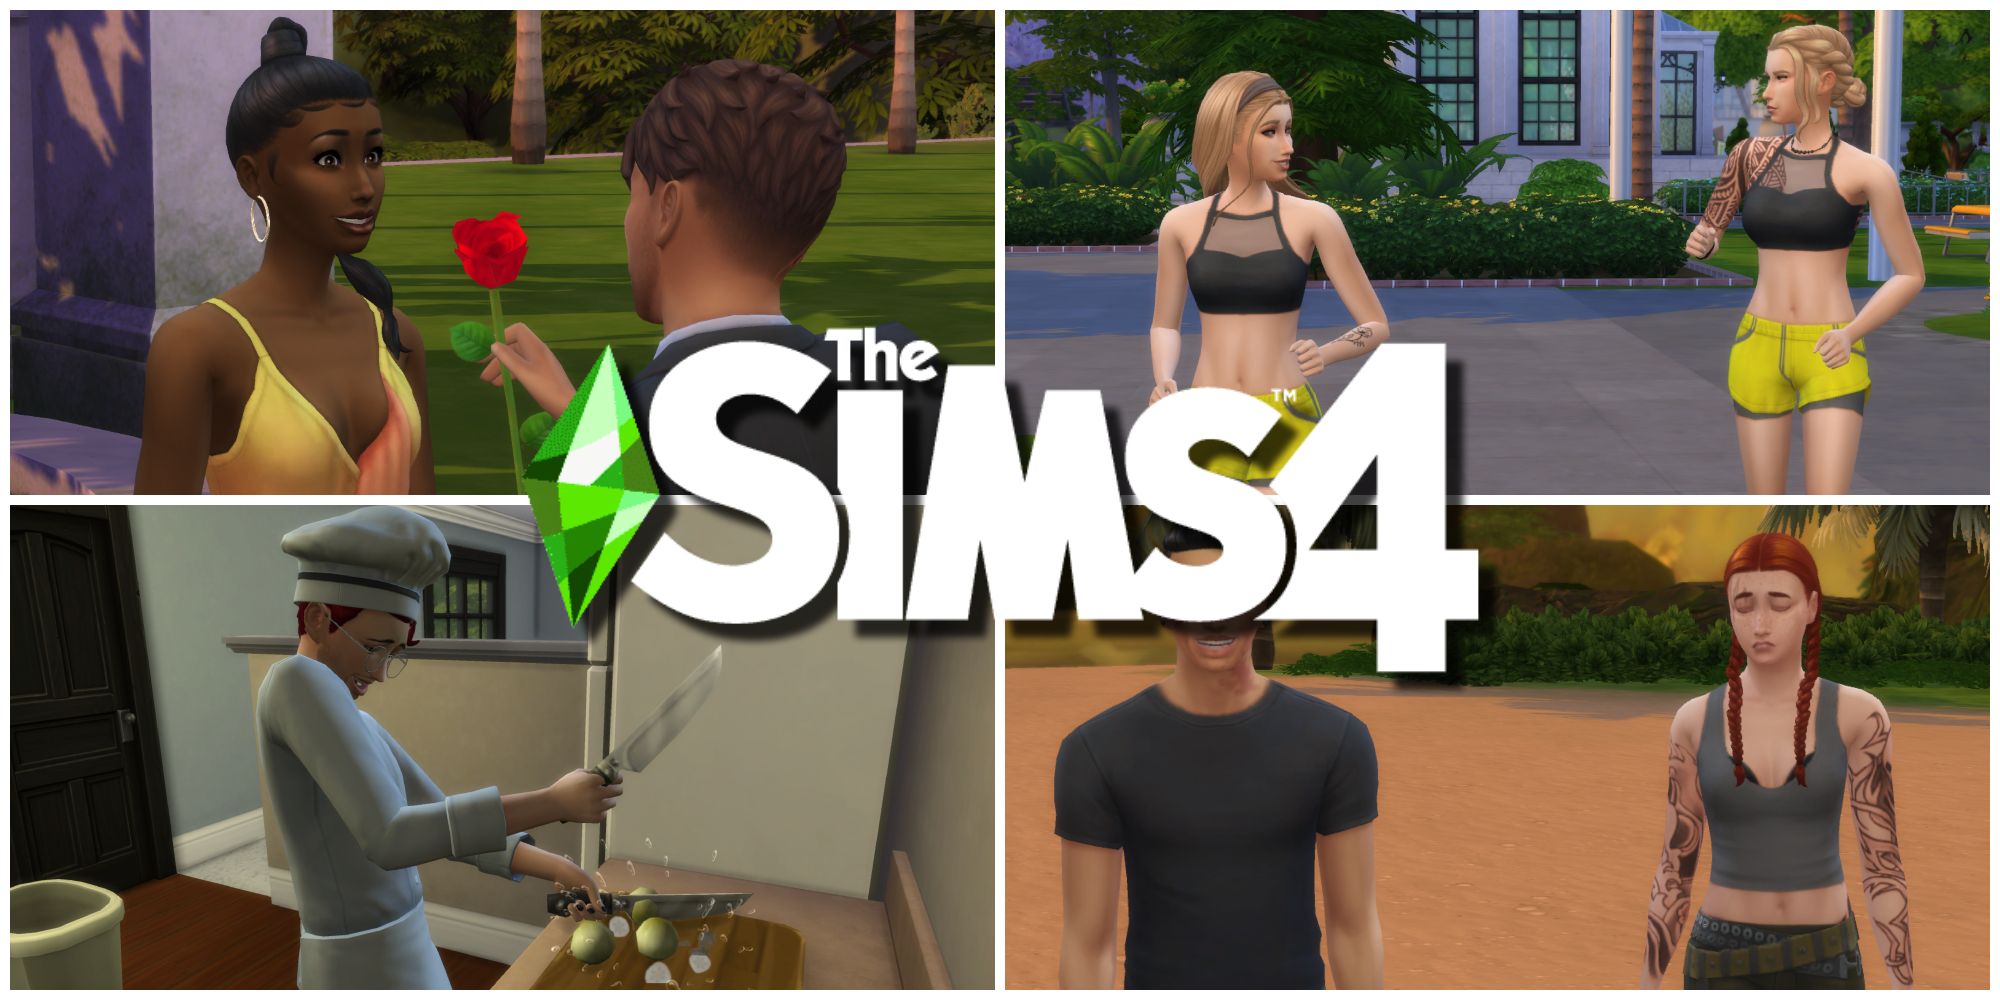 Four representations of reality tv challenges in The Sims 4